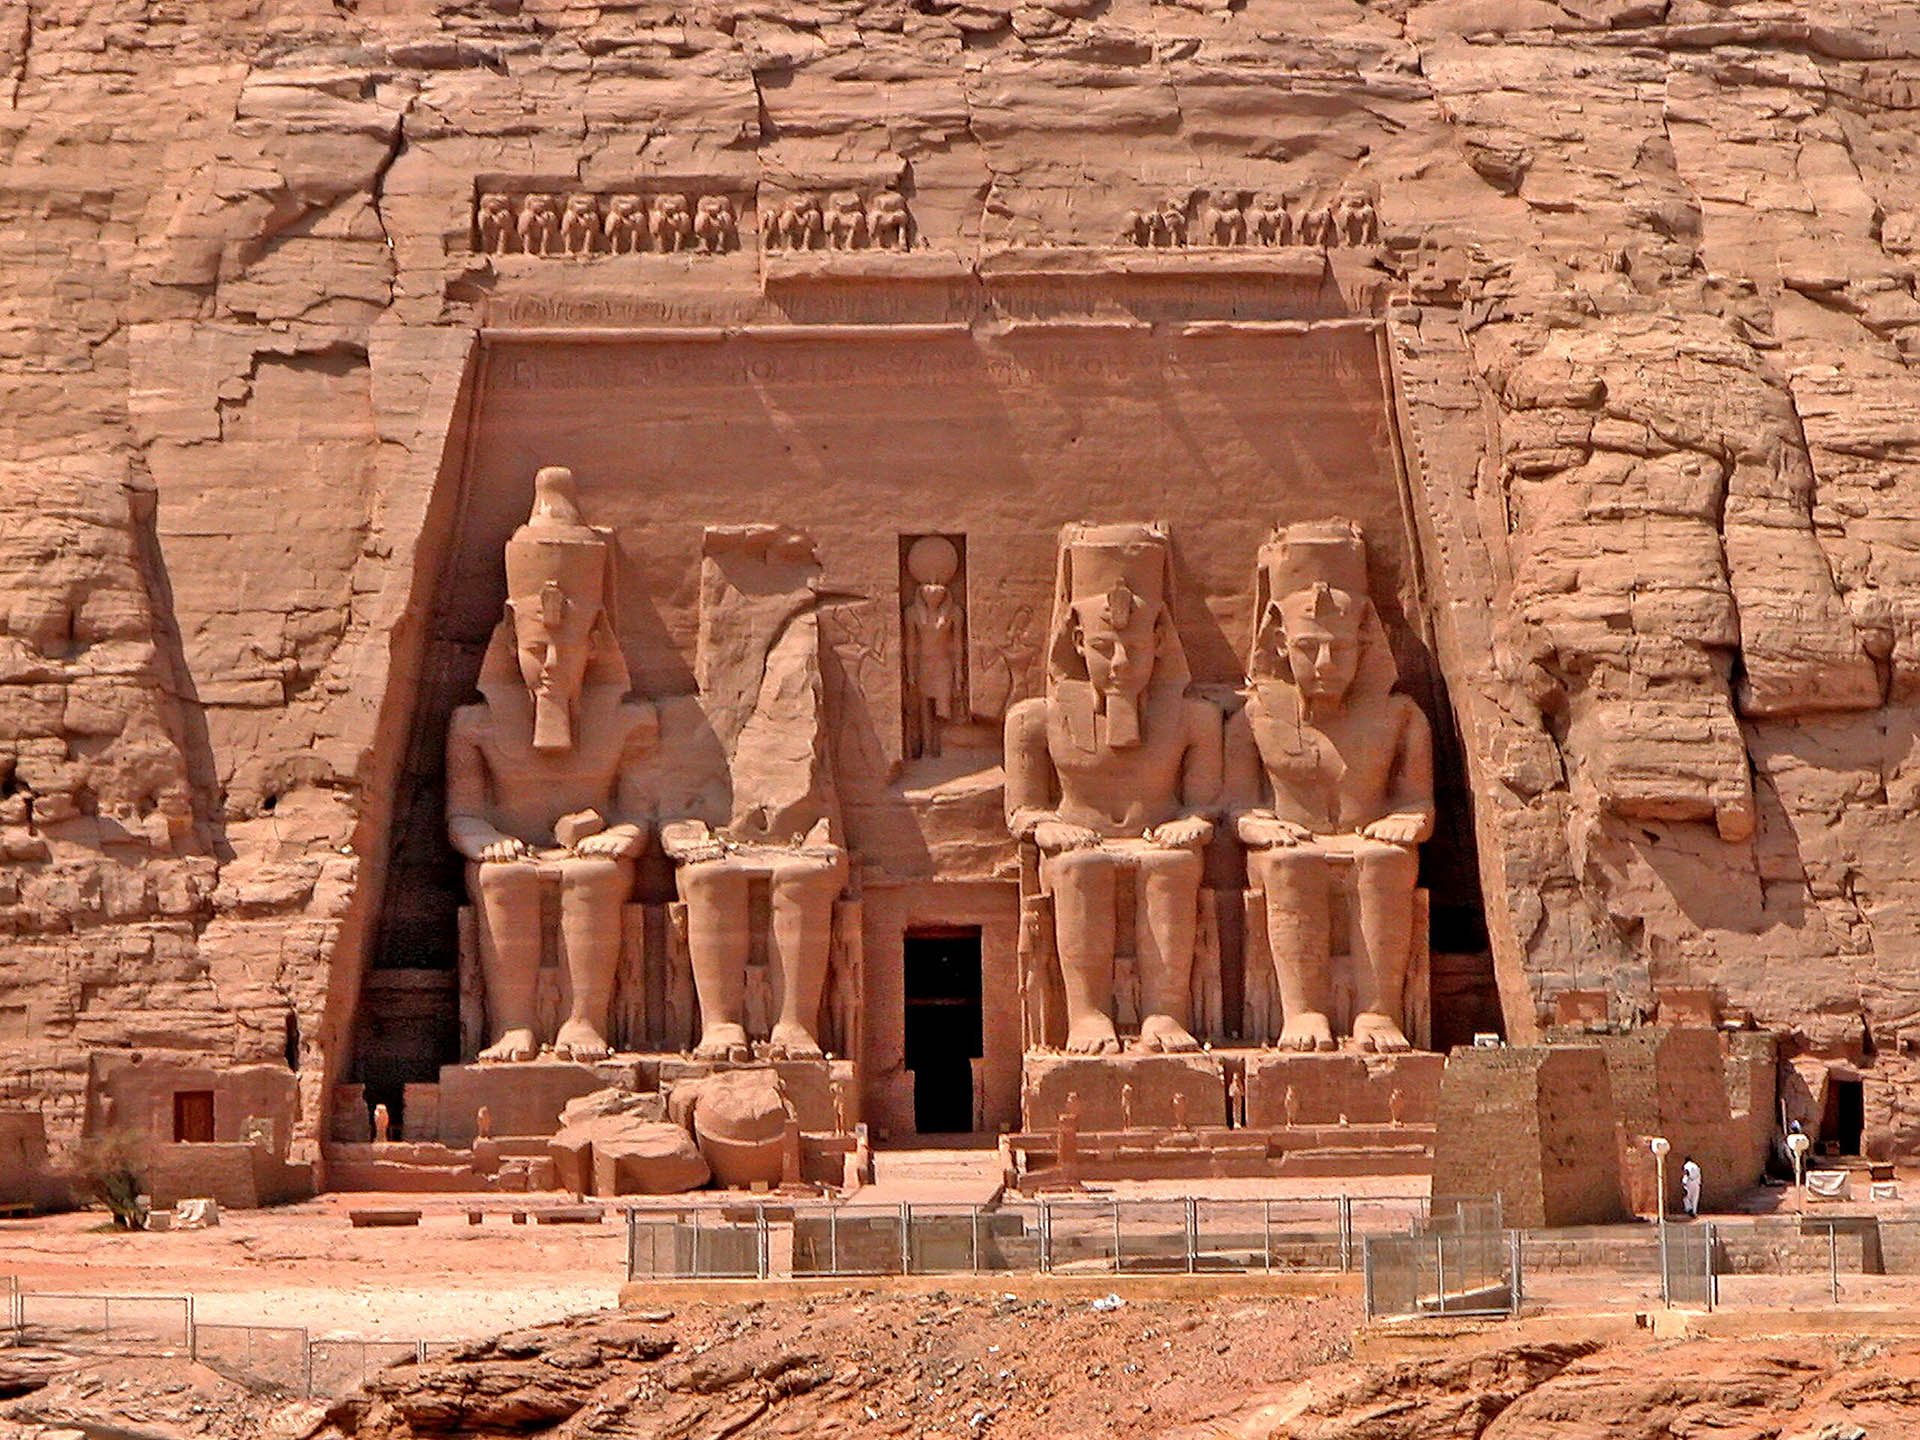 Abu Simbel Temple: Monumental Temples Carved into a Mountainside